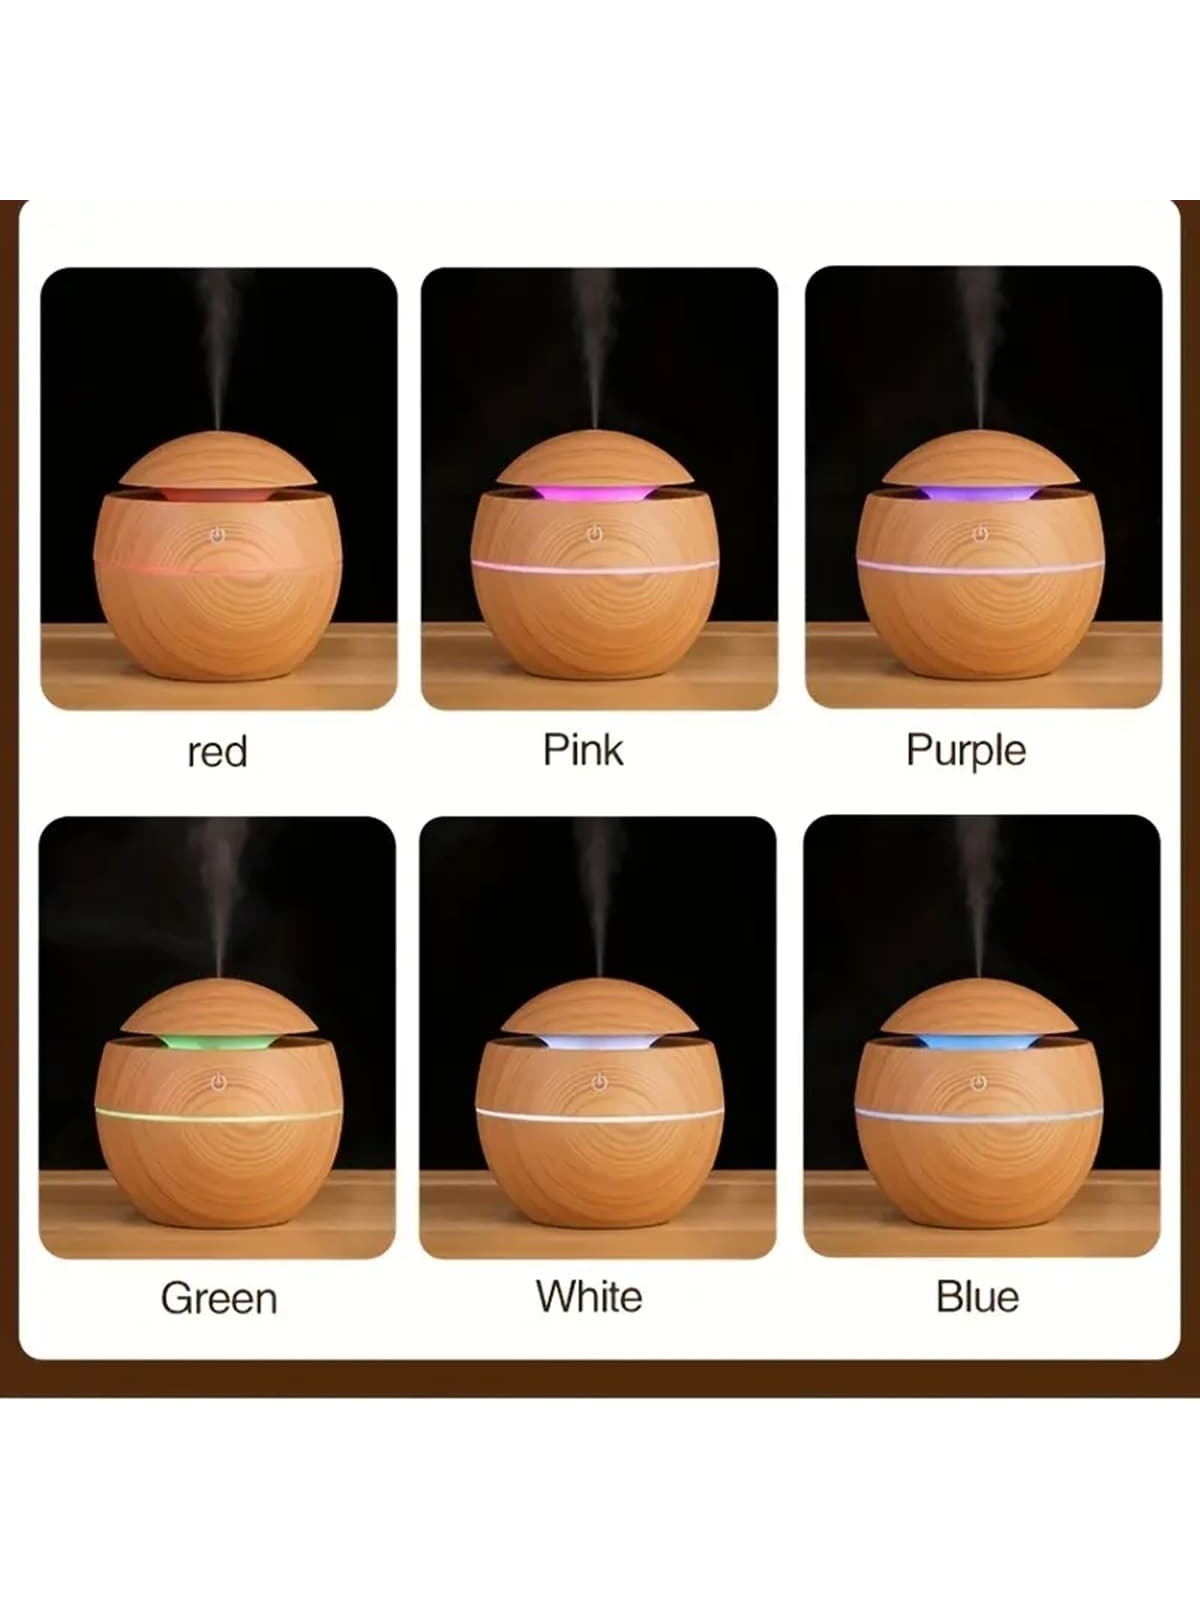 1pc Ball Shaped Humidifier & Aromatherapy Essential Oil Diffuser For Home, Office, Bedroom-light wood grain-4